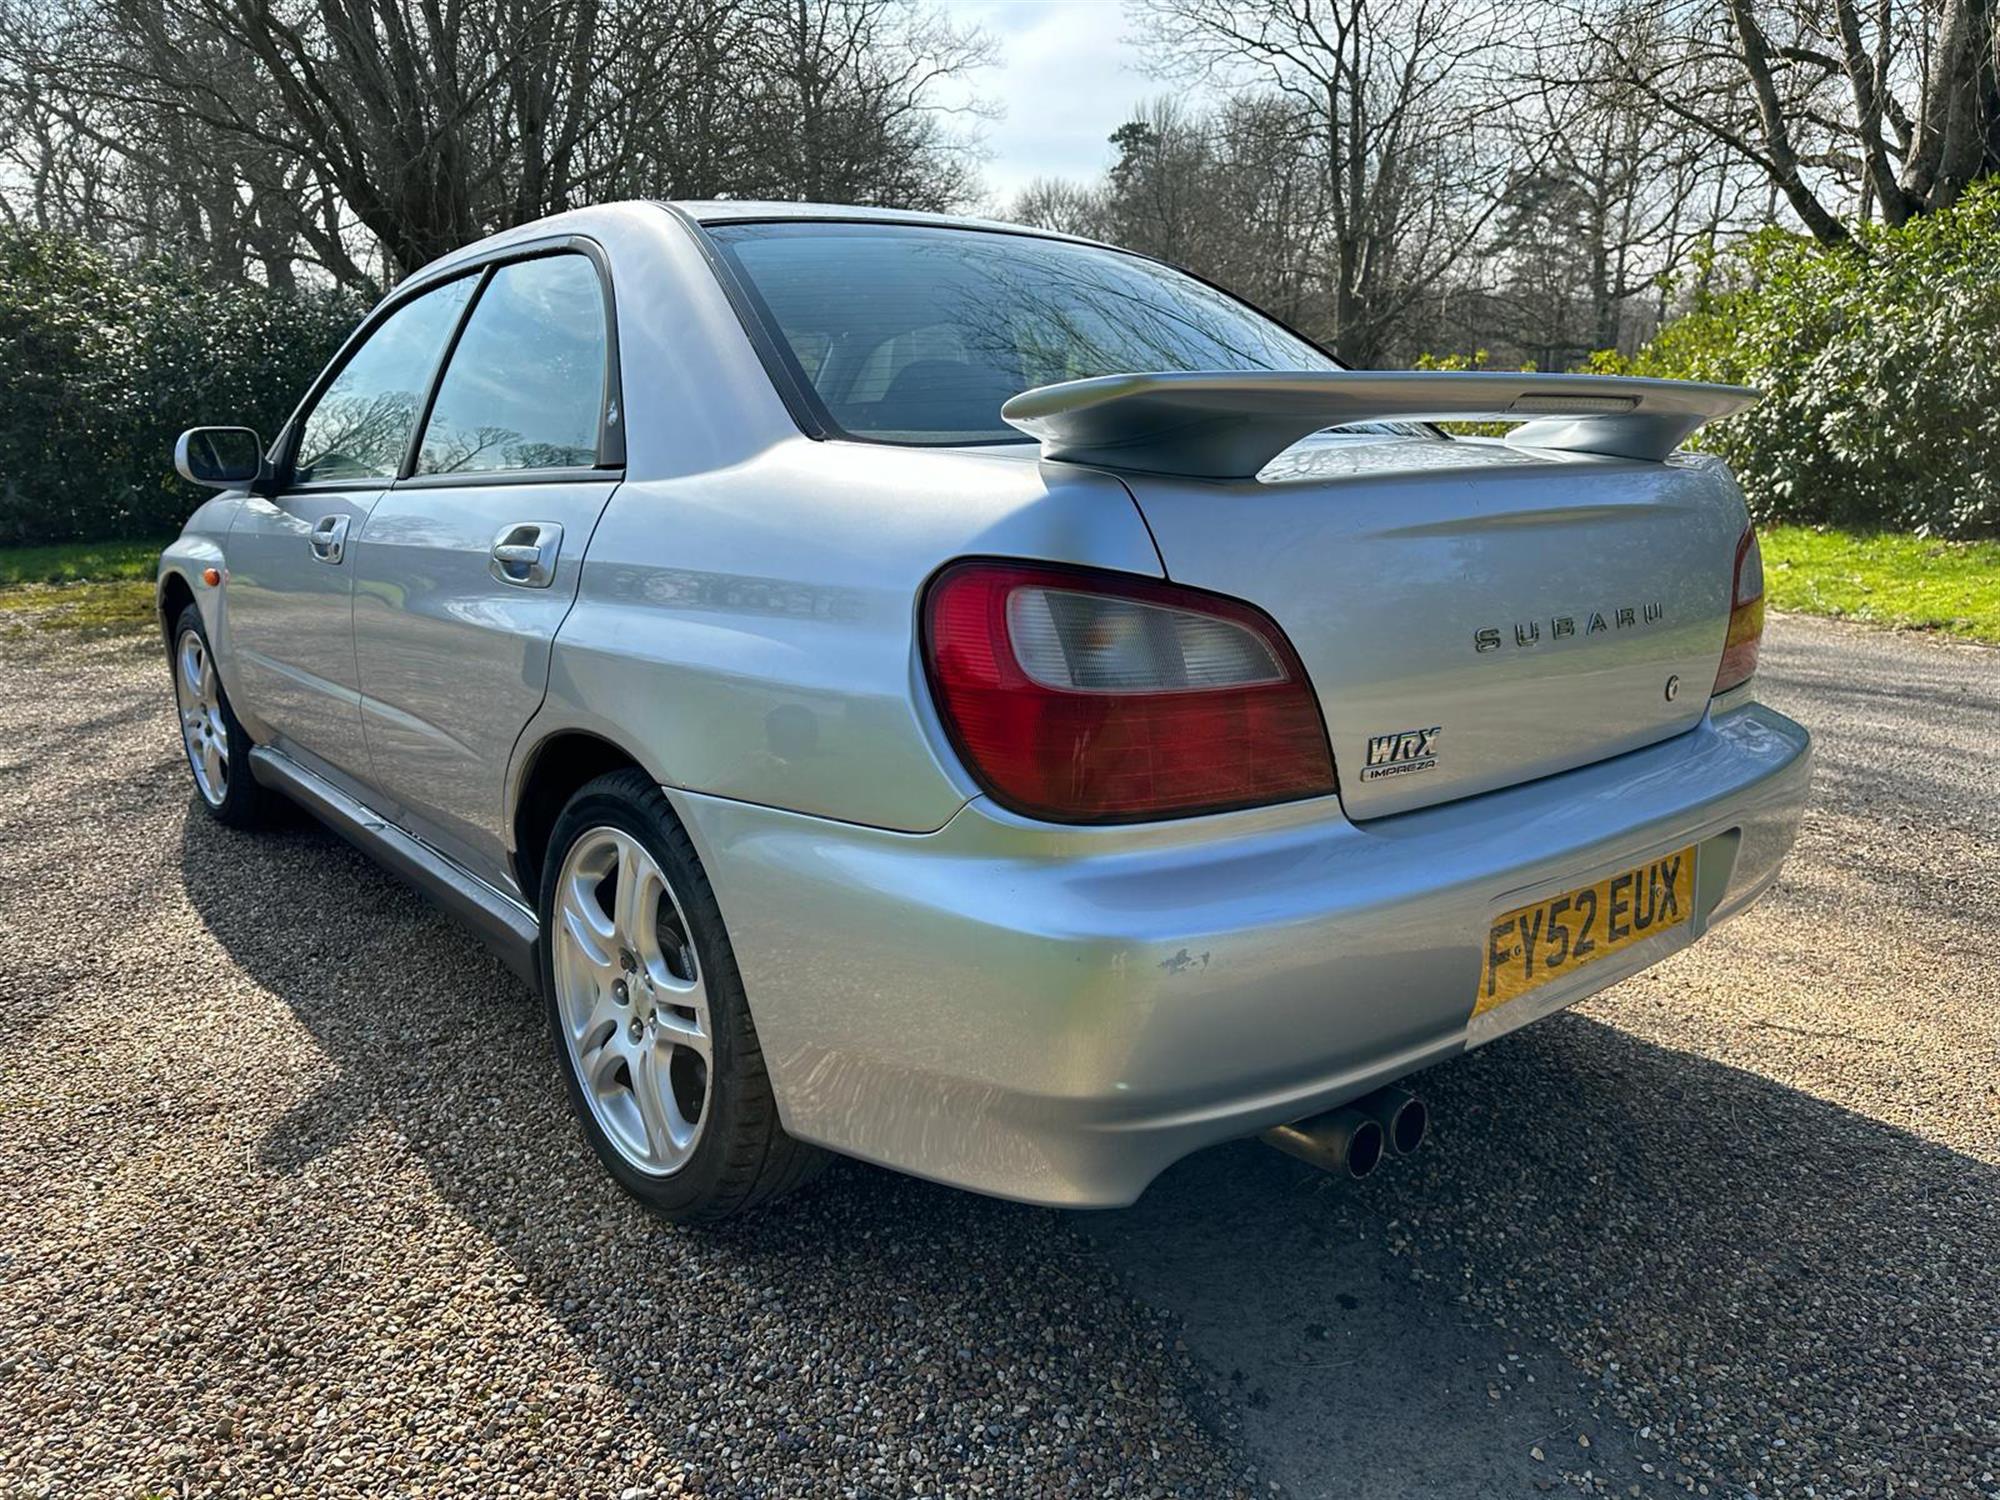 2002 Subaru Impreza 2.0 WRX AWD Turbo 4-dr Saloon. Registration: FY52 EUX. Finished in Silver. - Image 12 of 16